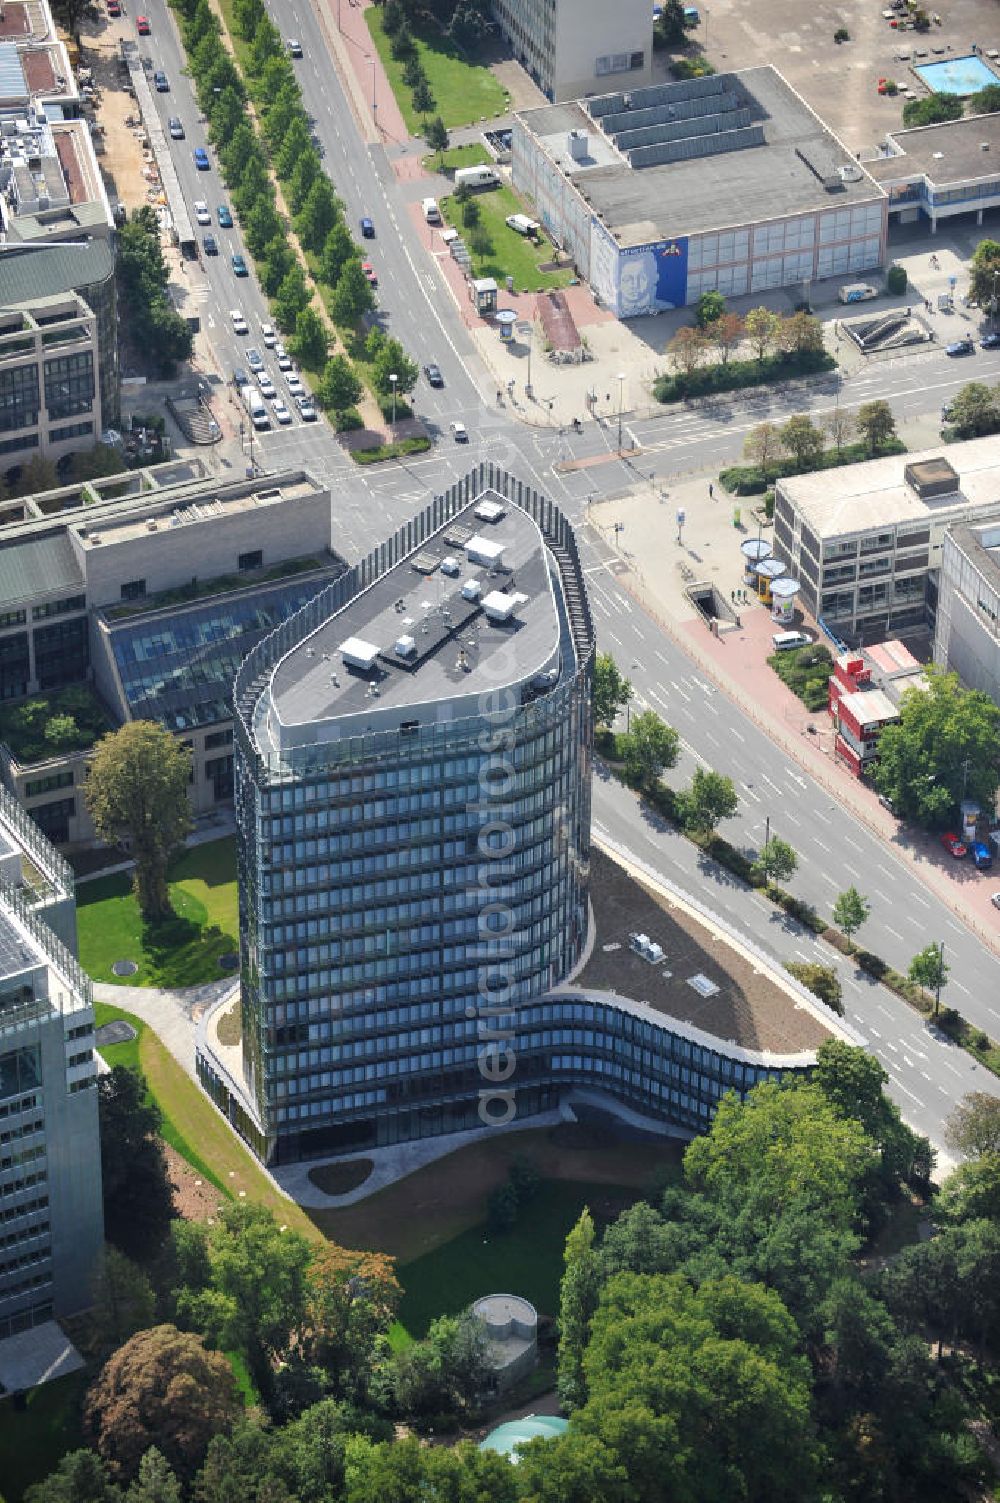 Aerial image Frankfurt am Main - The Westarkade is an office building in Frankfurt am Main. It is located at the Westend district between Zeppelinallee, Bockenheimer Landstraße and Palmengarten. It is owned by the KfW banking group